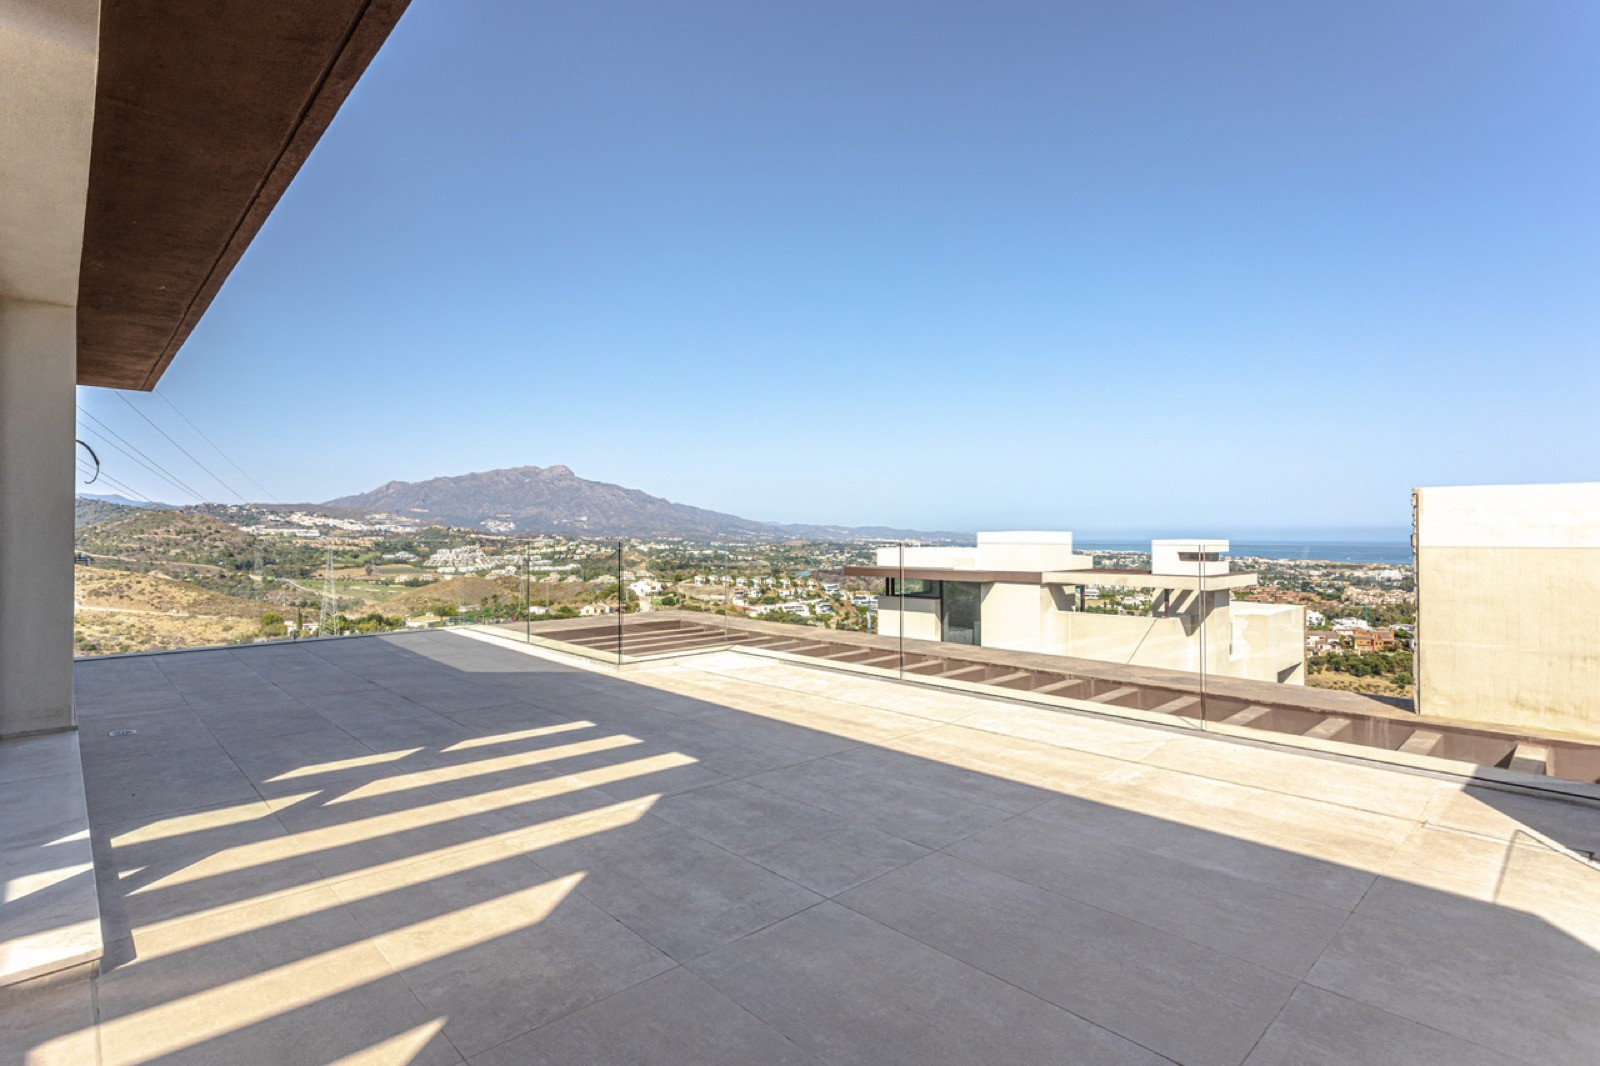 Exceptional boutique project of 13 luxury villas surrounded by Mediterranean gardens and enjoying fabulous panoramic sea views close to some of the best golf courses on the Costa del Sol